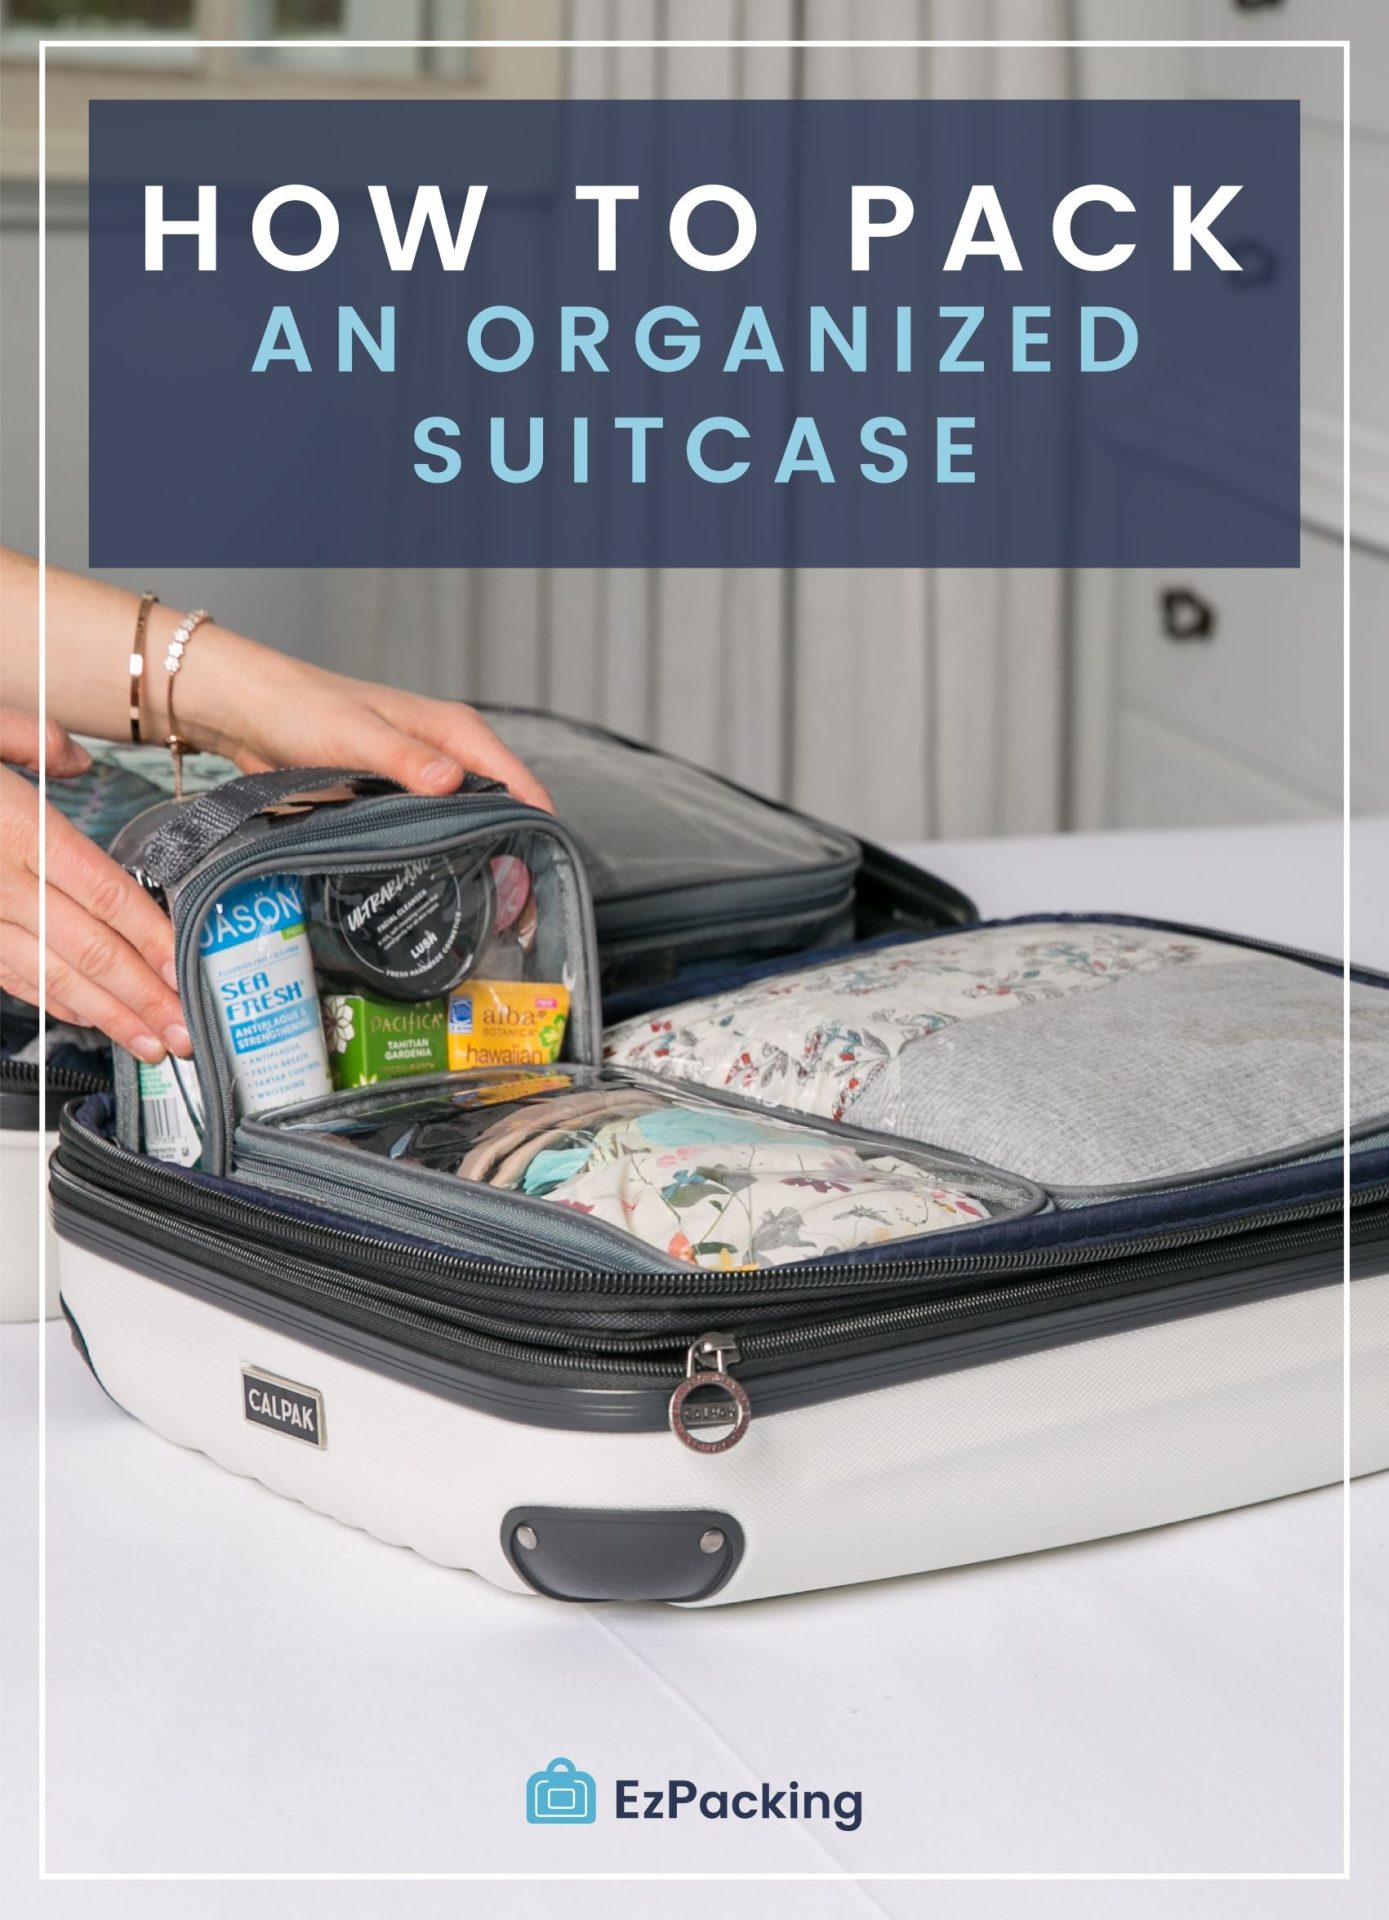 How to pack an organized suitcase